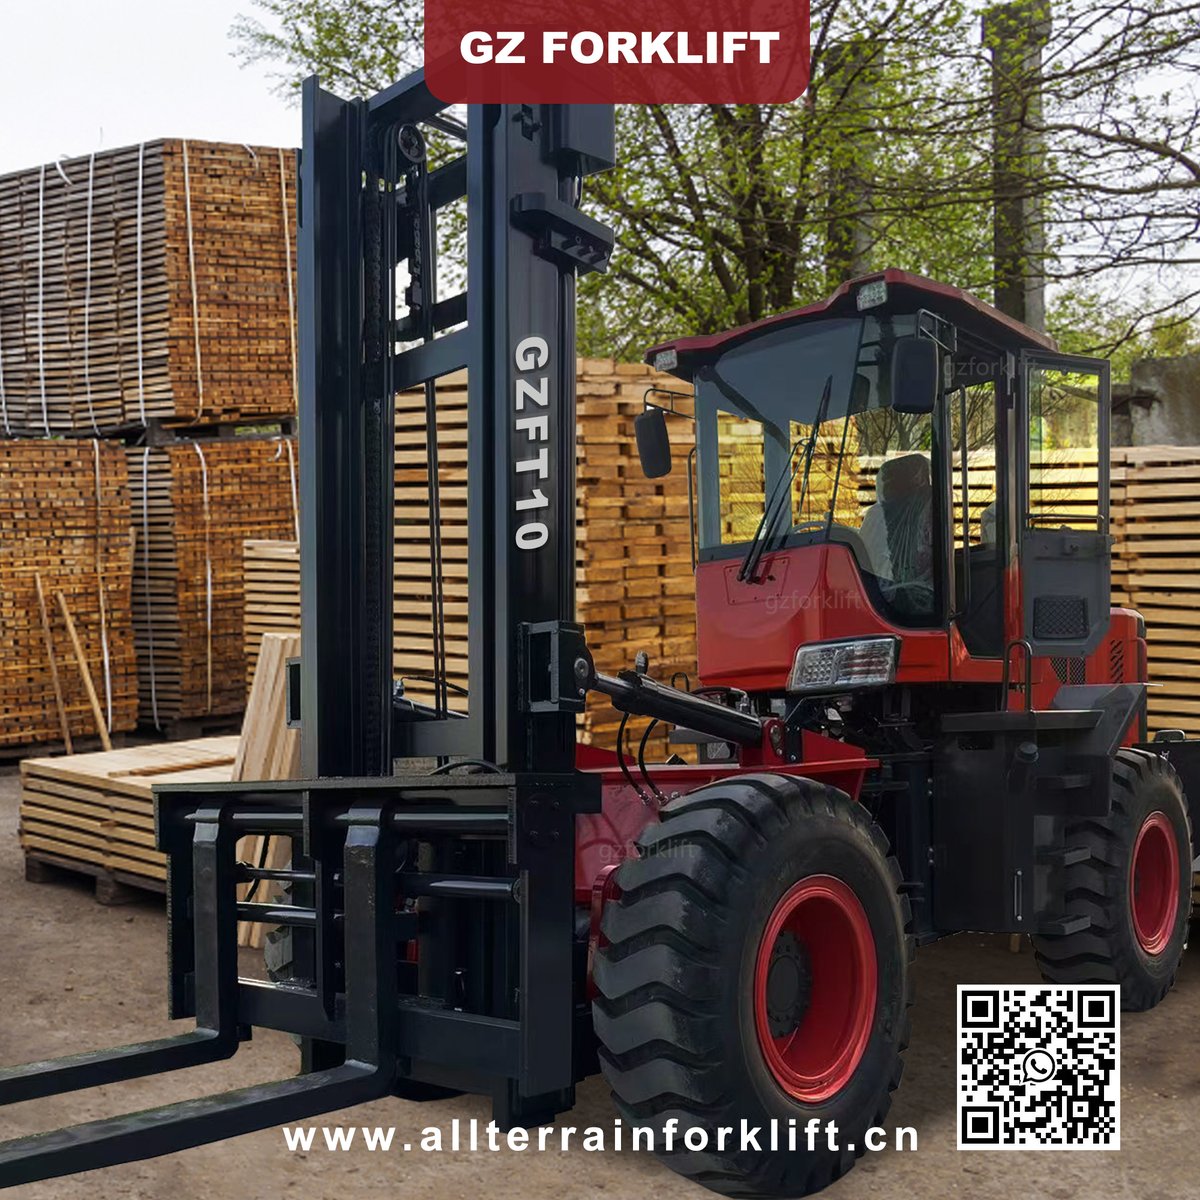 📣Rough Terrain Forklift
✅10 Ton/4-Wheel Drive/Diesel Engine
✅Overall Size(L/W/H): 6350x2150x3450mm
✅Engine(Brand optional): 115kw
✅Tyre: Pneumatic Tyre 17.5-25
📲More information, pls whatsapp 86 13053557263
🌐allterrainforklift.cn
#RoughTerrainForklift